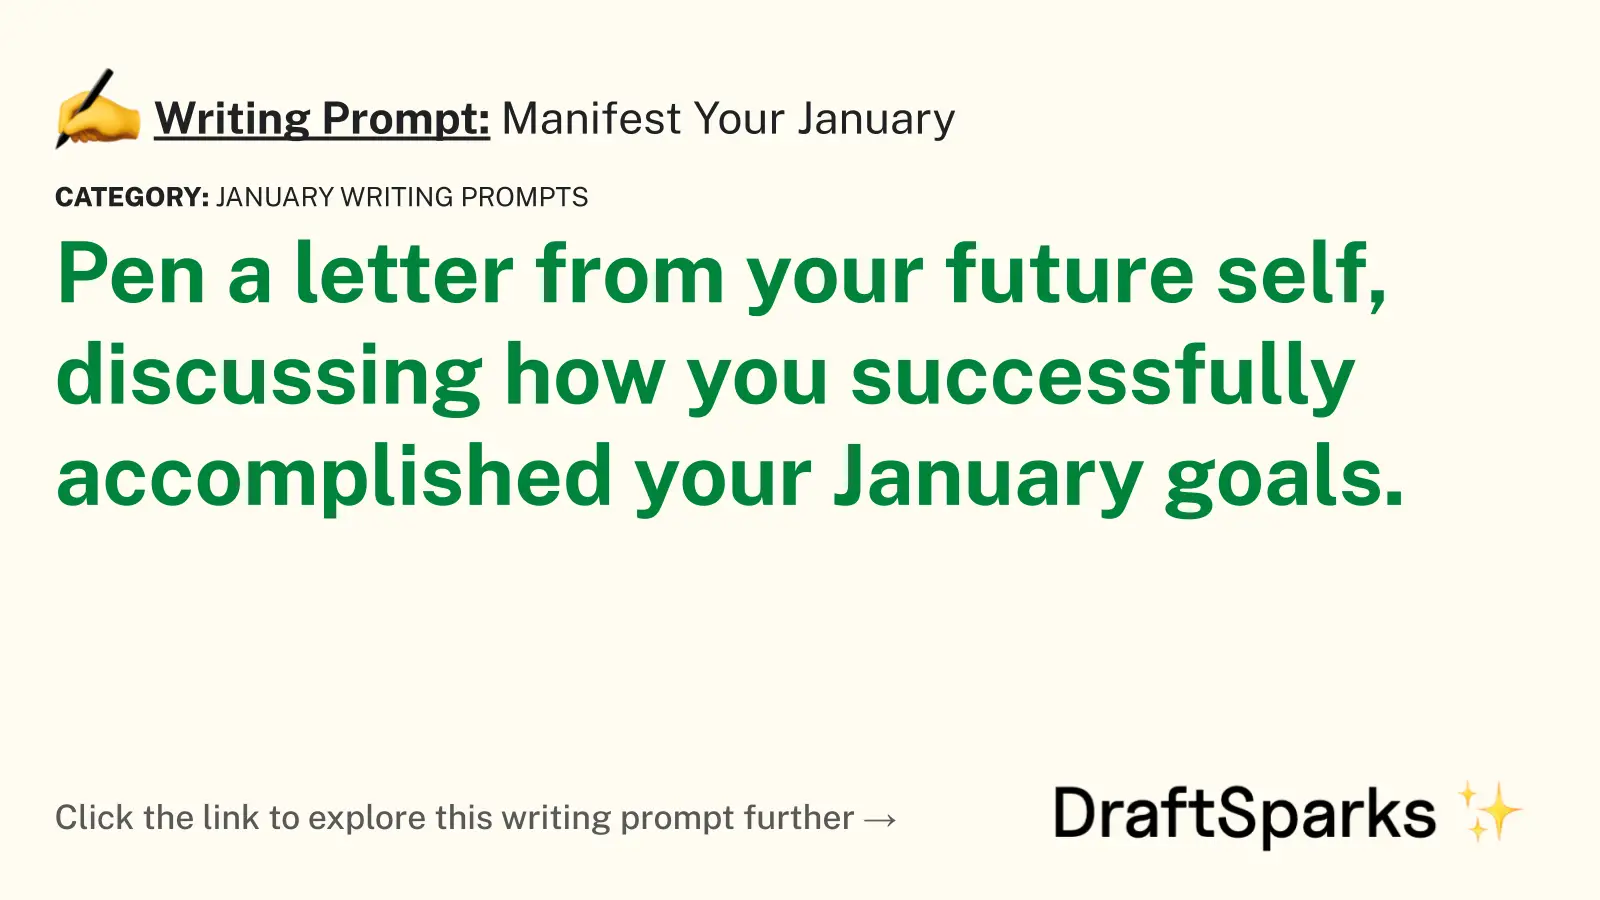 Manifest Your January